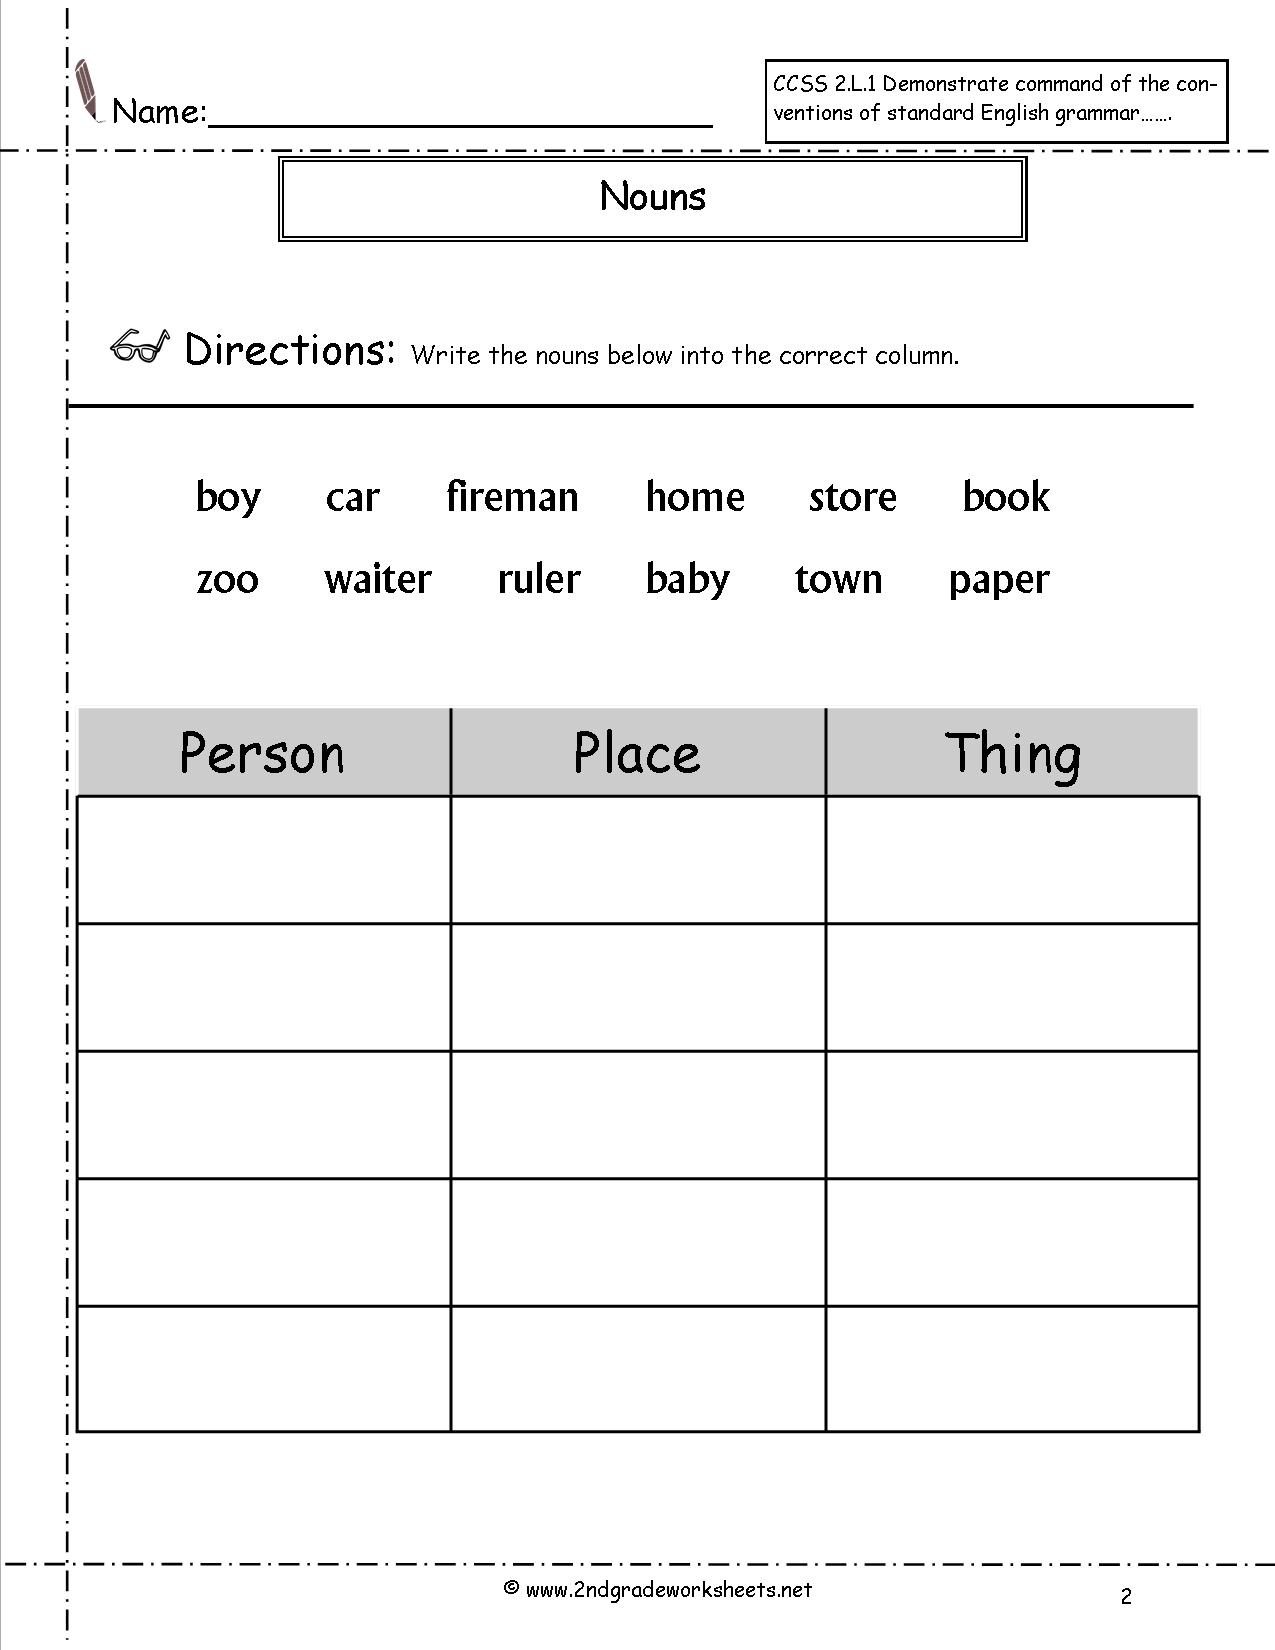 7 Nouns Person Place Or Thing Worksheet Worksheeto